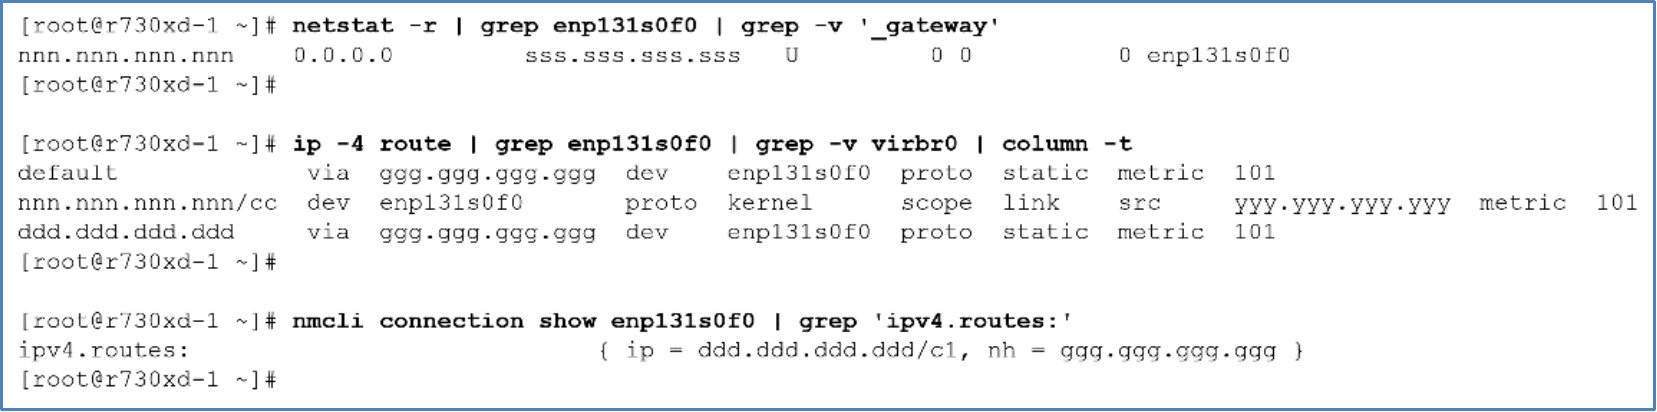 This diagram shows the output of LInux's "netstat -r", "ip -4 route", and nmcli connection show device" commands. The output shows that a static route is used for interface enp131s0f0.